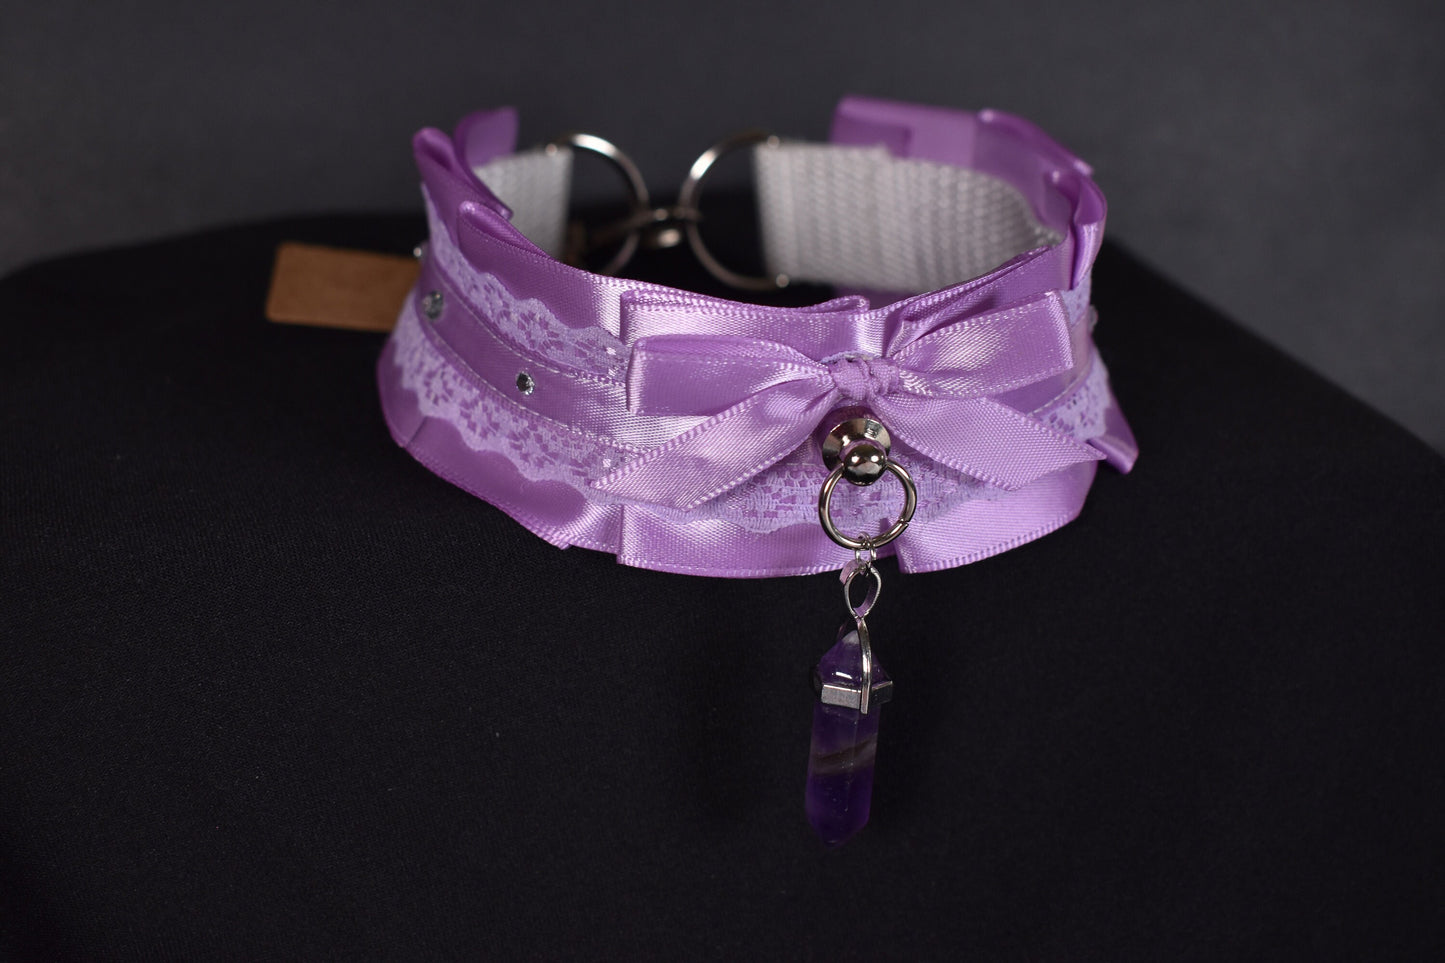 Made to your size / Lavender Amethyst choker / goth / emo / kitten play / alt fashion / bdsm / pet play necklace / kawaii fashion